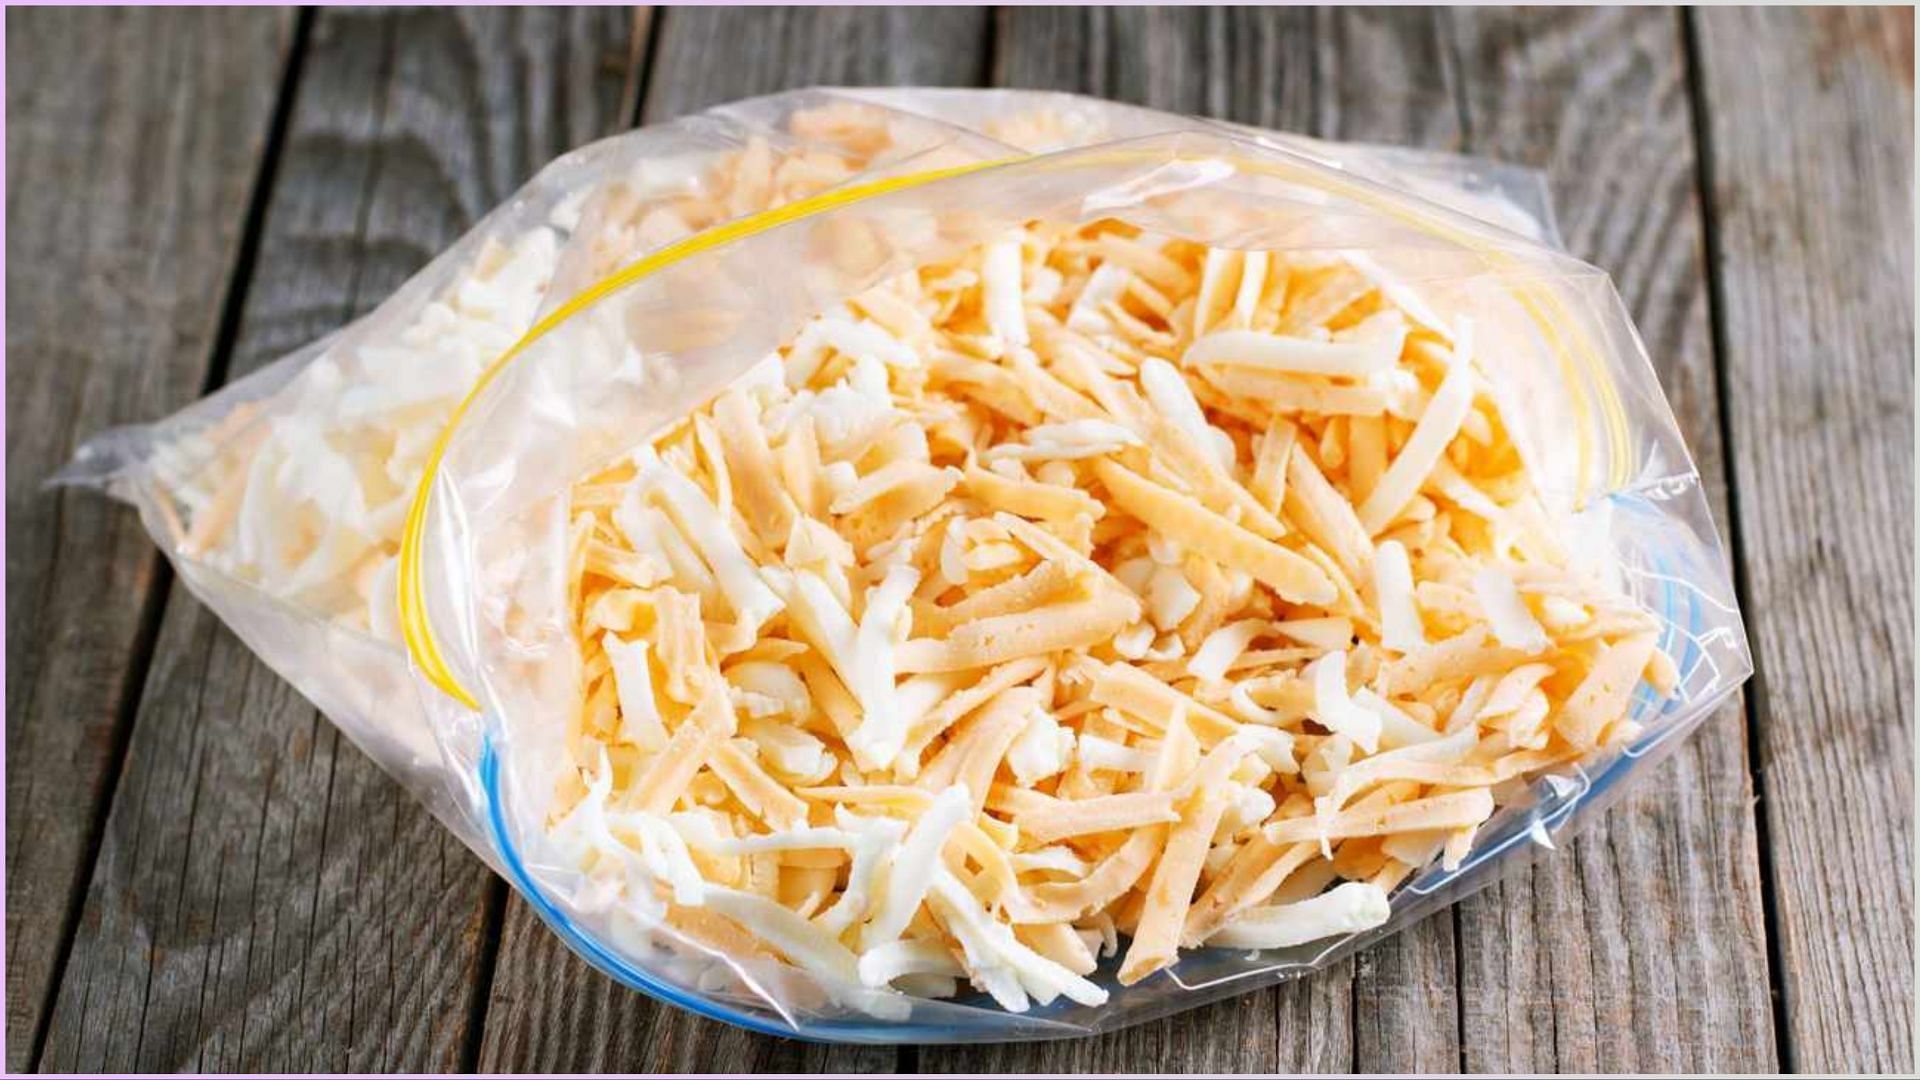 Grated Cheese recall Products, refund, and all you need to know